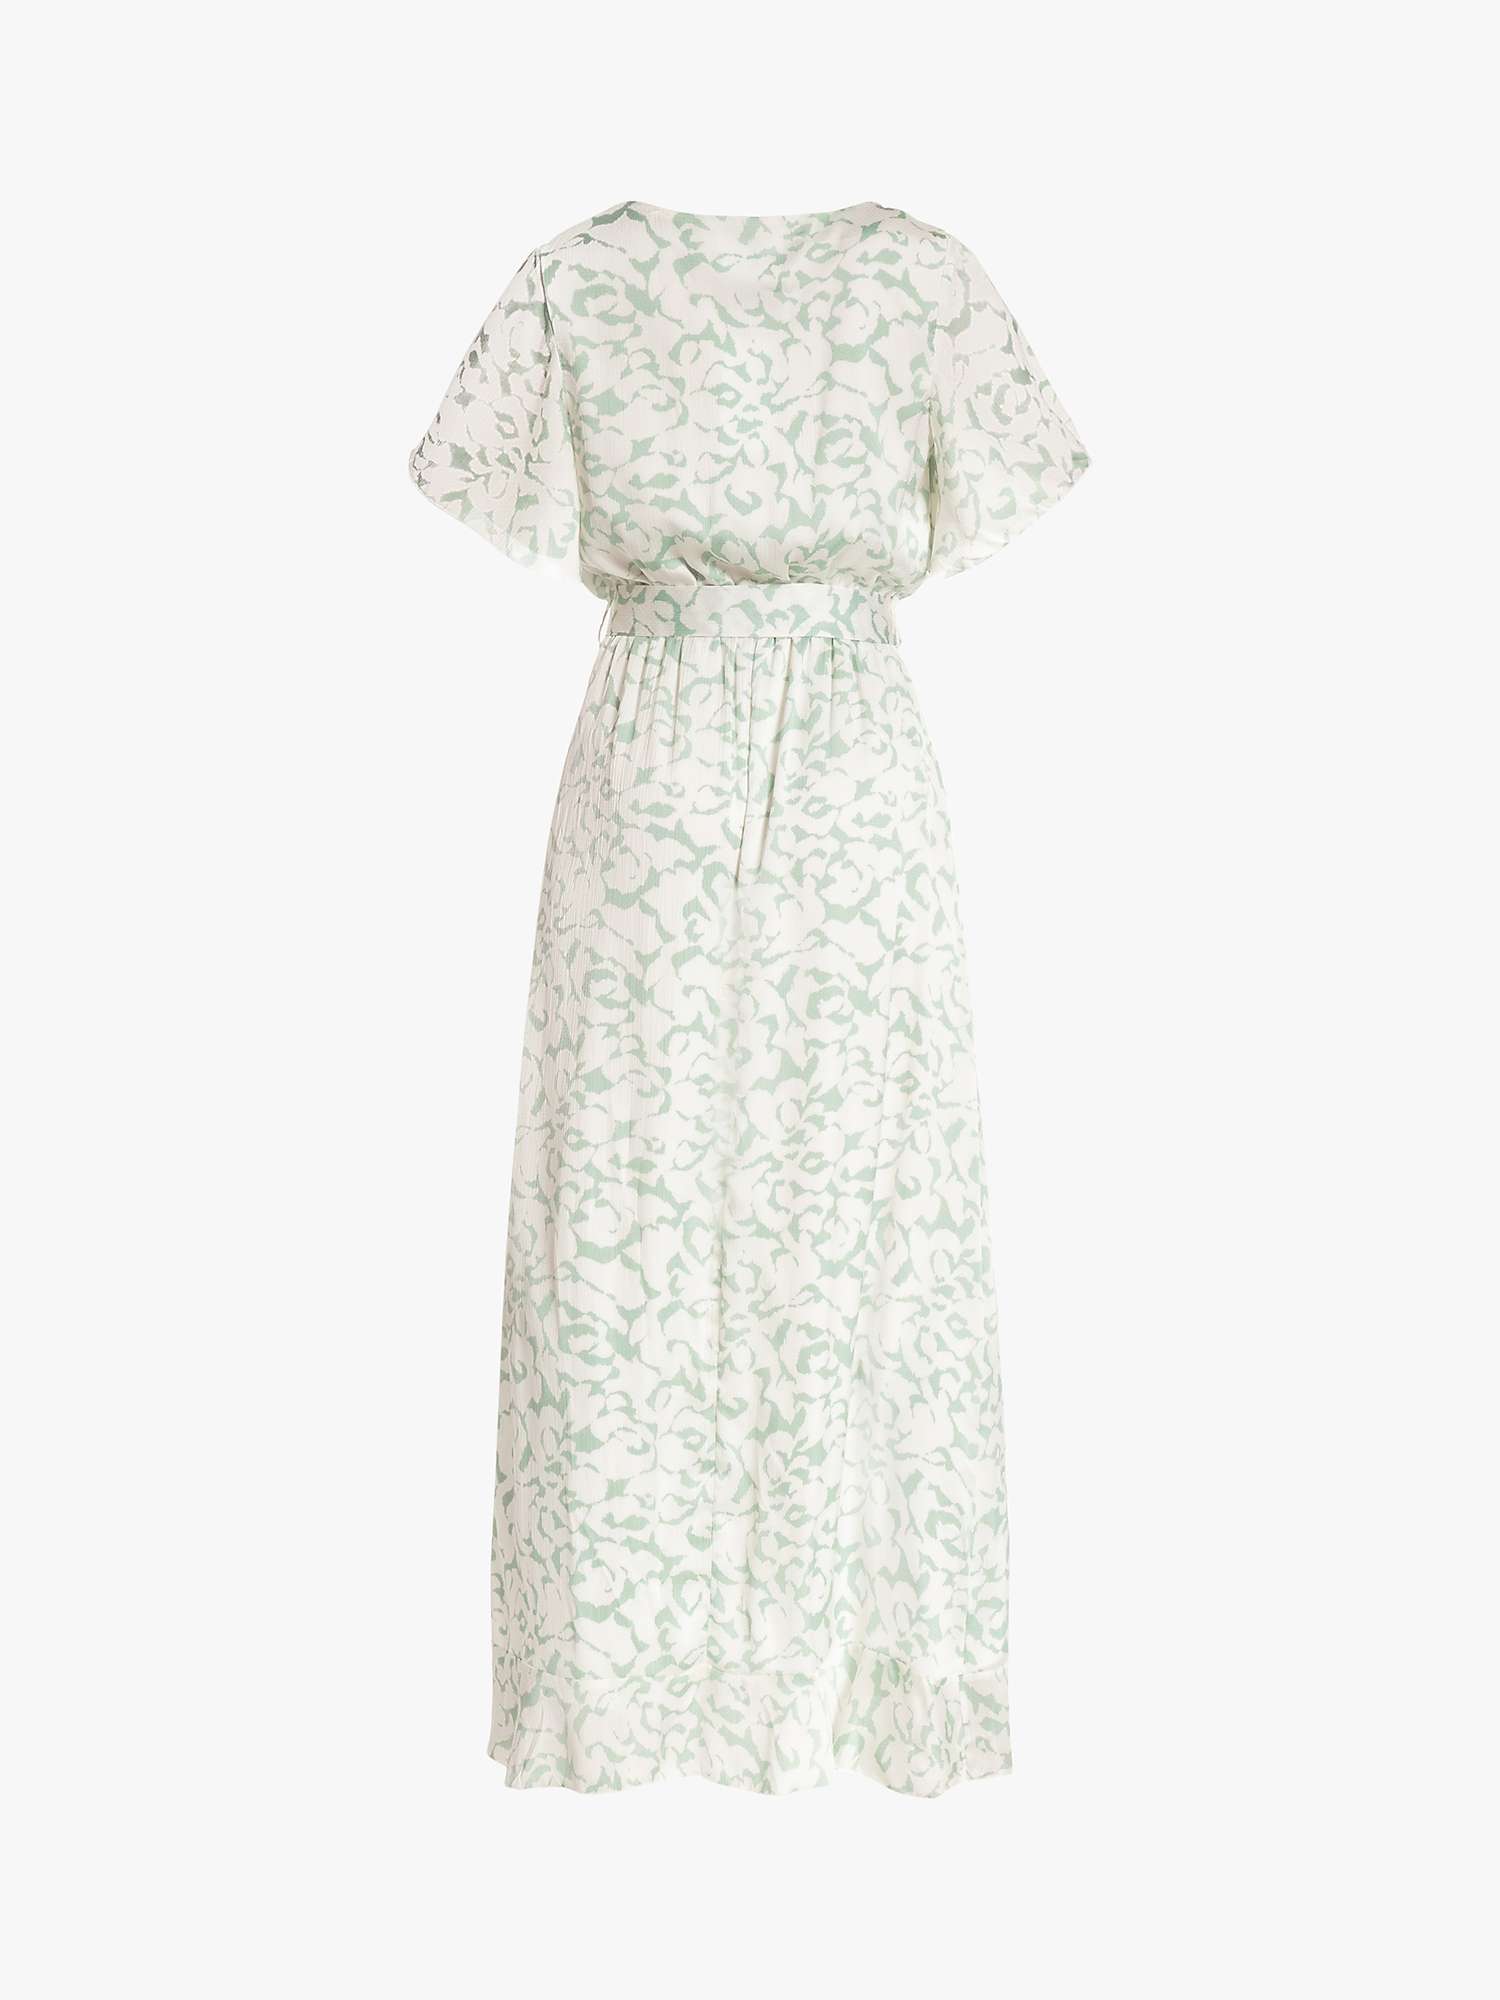 Buy Sisters Point Floral Print Maxi Wrap Dress, Light Green/White Online at johnlewis.com